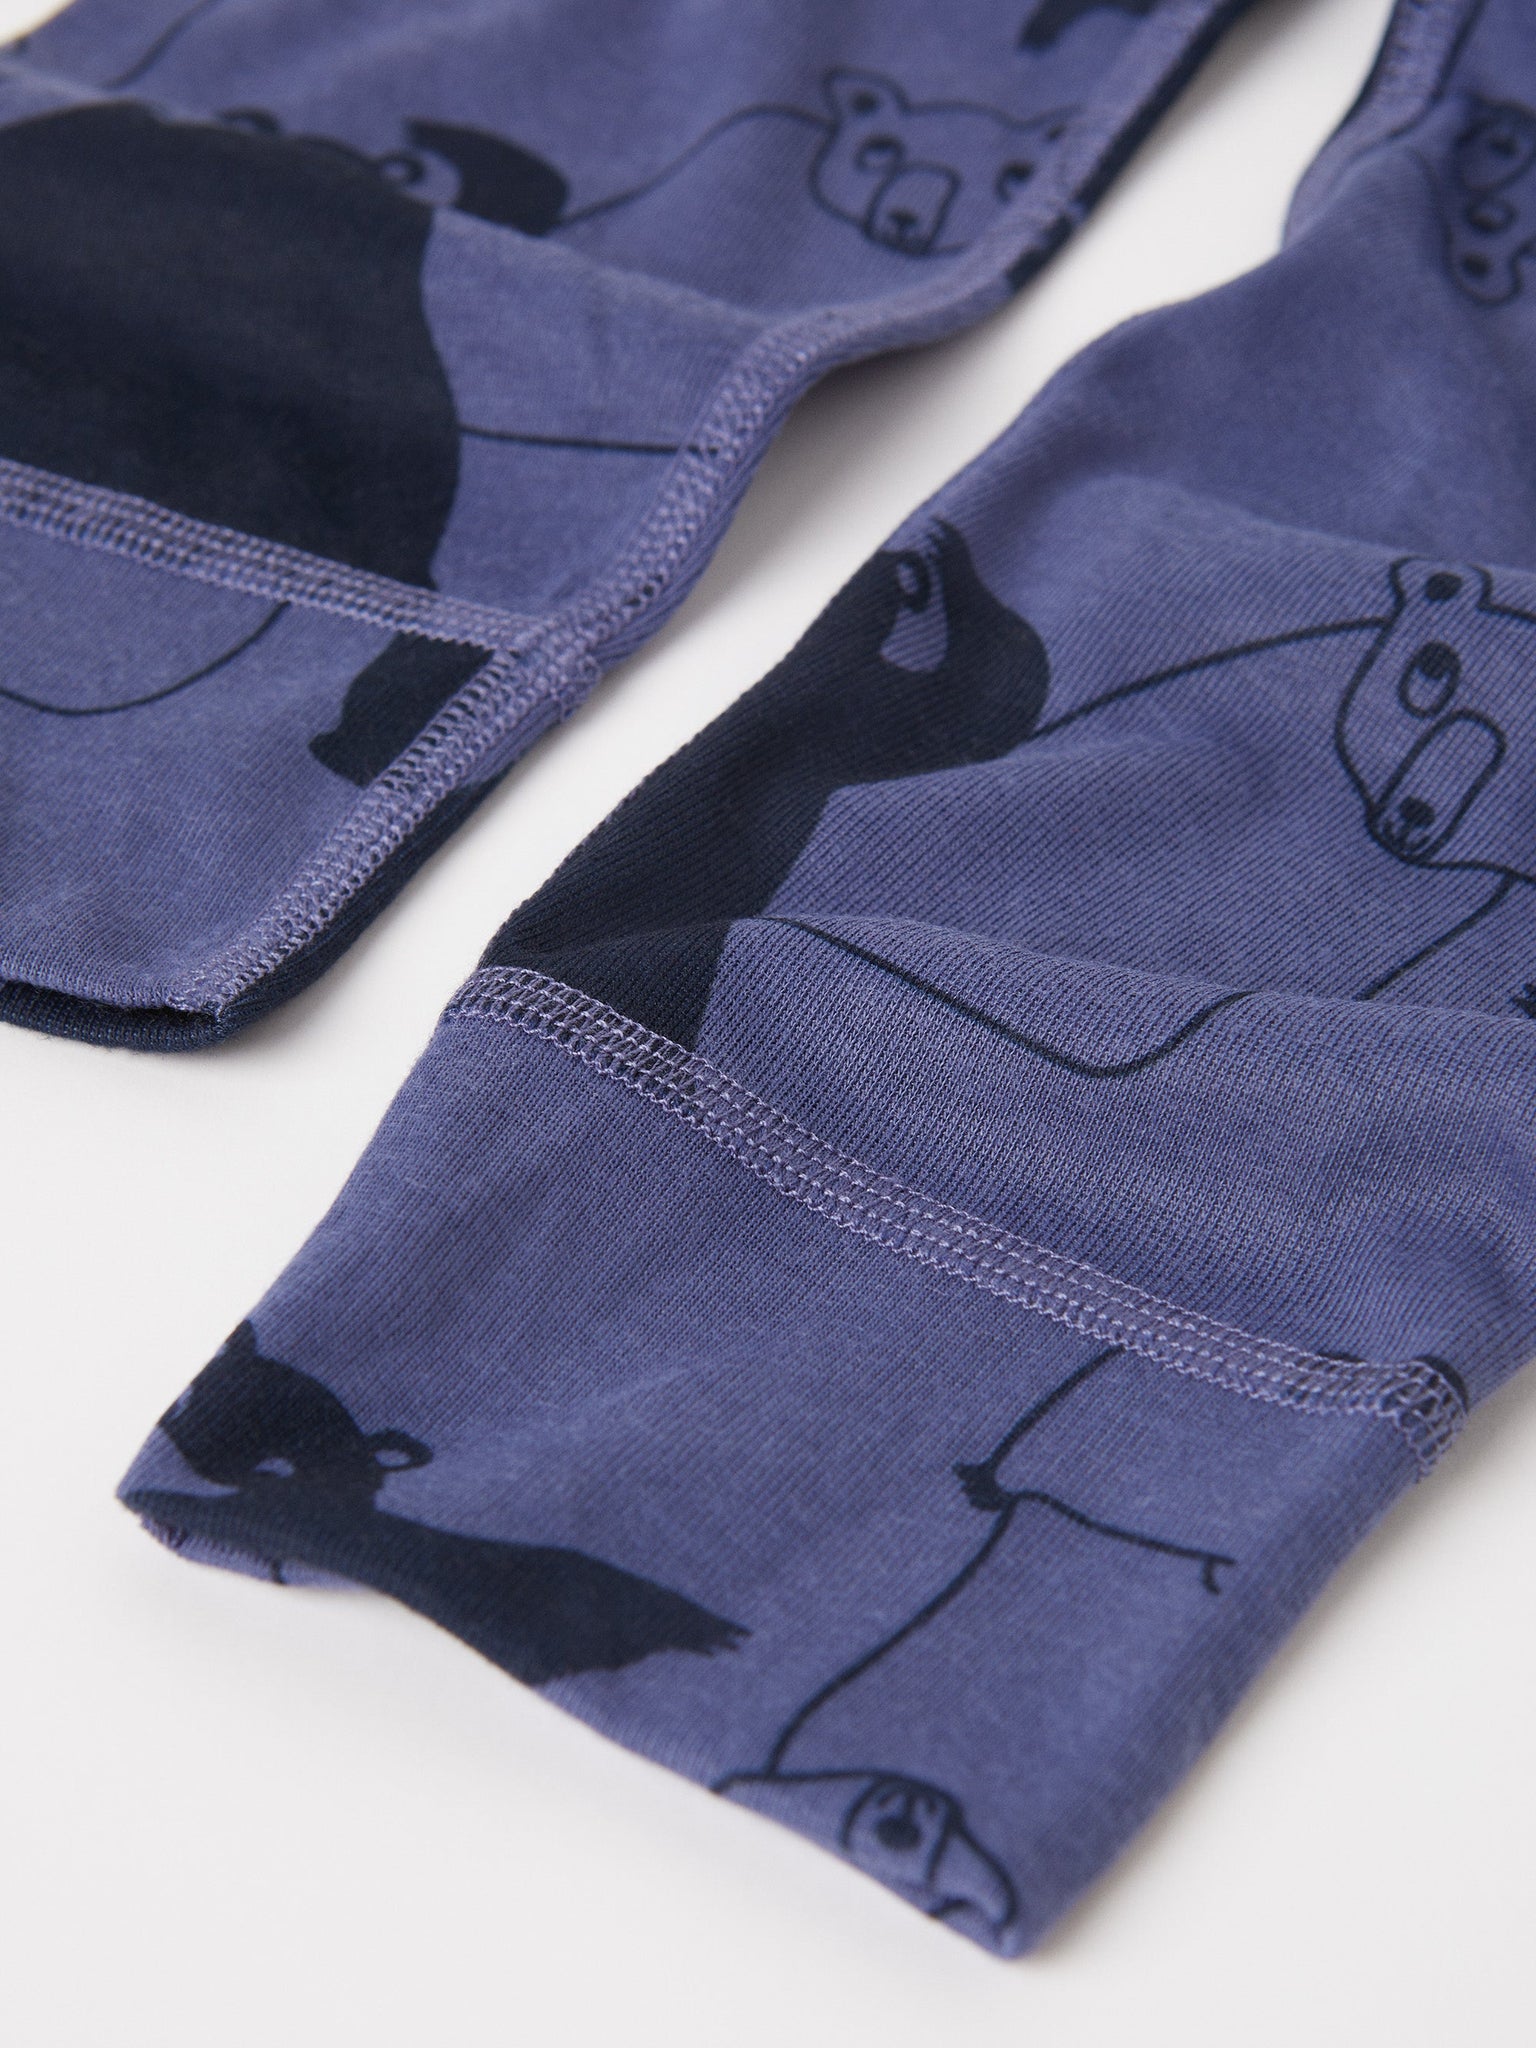 Polyester Blue Kids Thermal Leggings from the Polarn O. Pyret outerwear collection. Kids outerwear made from sustainably source materials